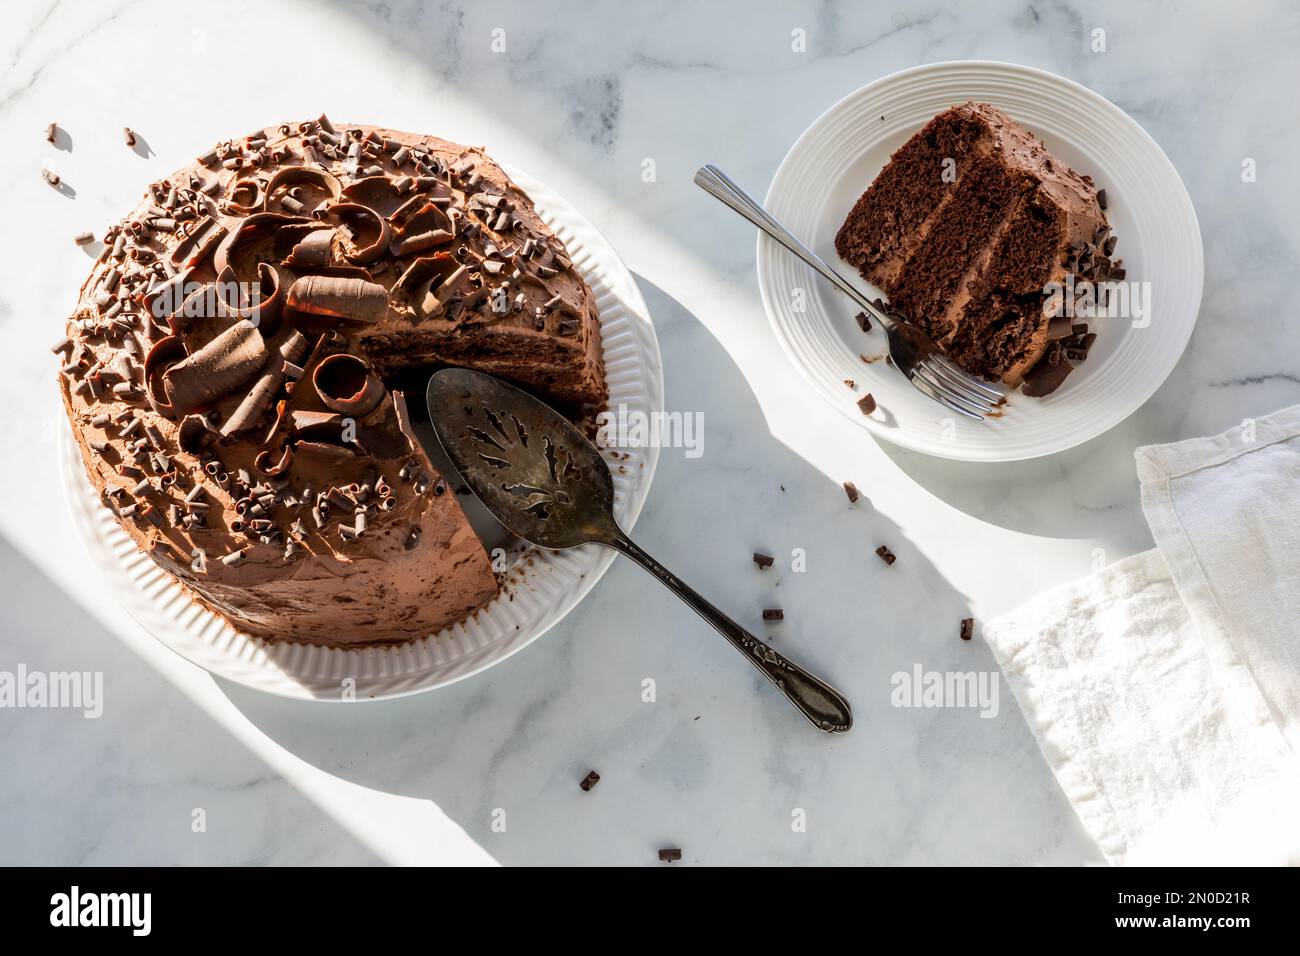 A chocolate cake decorated with chocolate curls, sitting in bright sunlight. Stock Photo